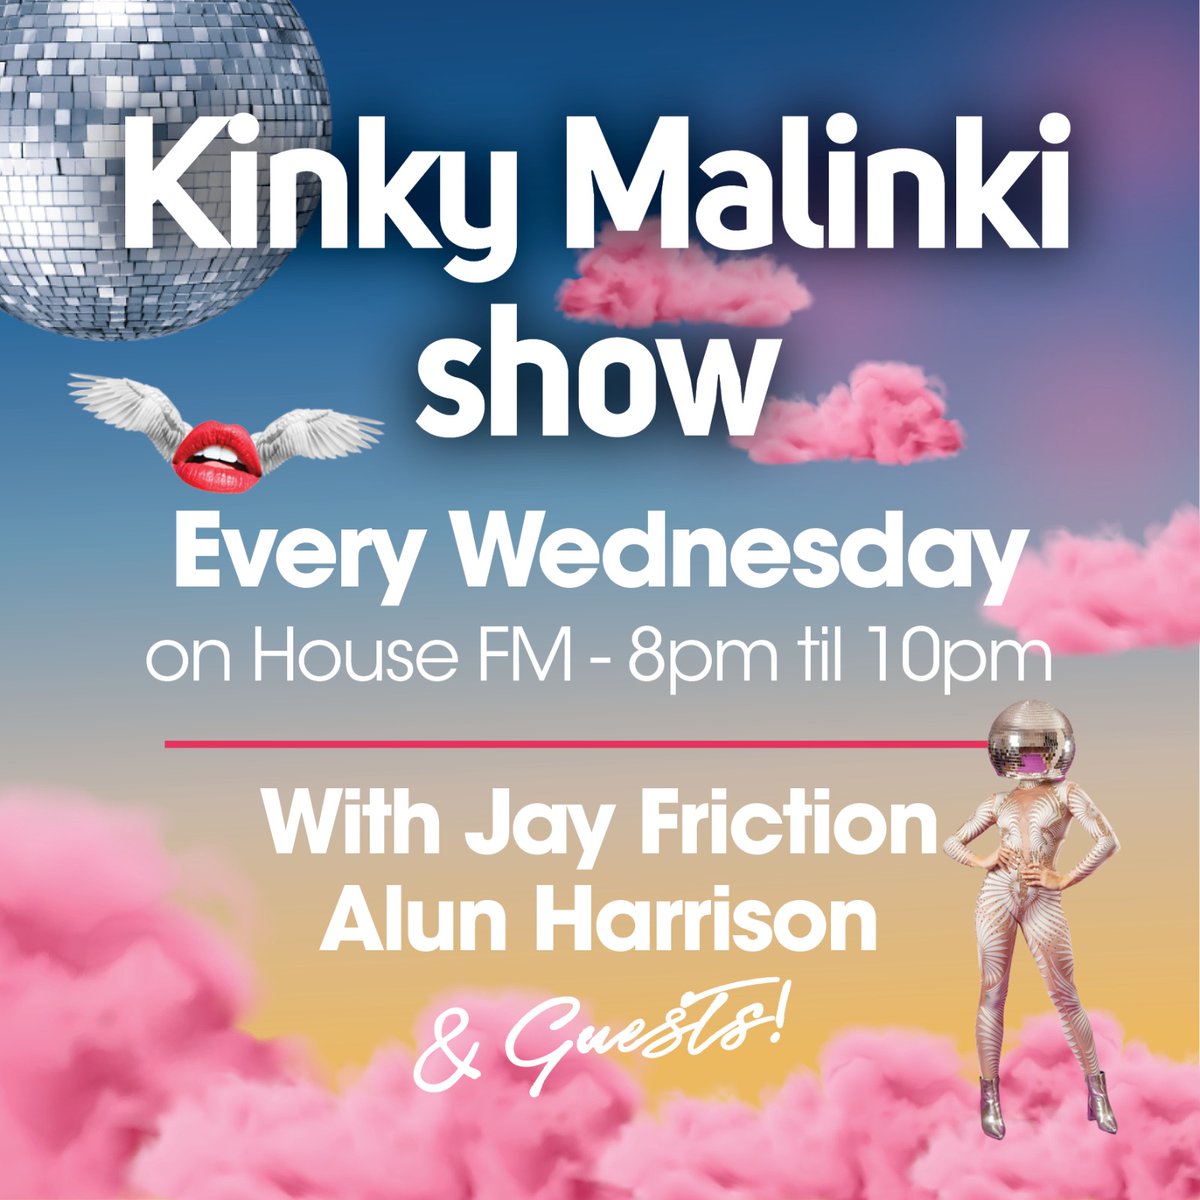 Our Kinky Malinki Radio Show on House FM has a fresh slot starting this week! 📻 Tune in to the KM show every Wednesday, at 8pm until 10pm! 🕗 🔥 hse.fm 🎶 #HouseFM #KinkyMalinki #LondonMusic